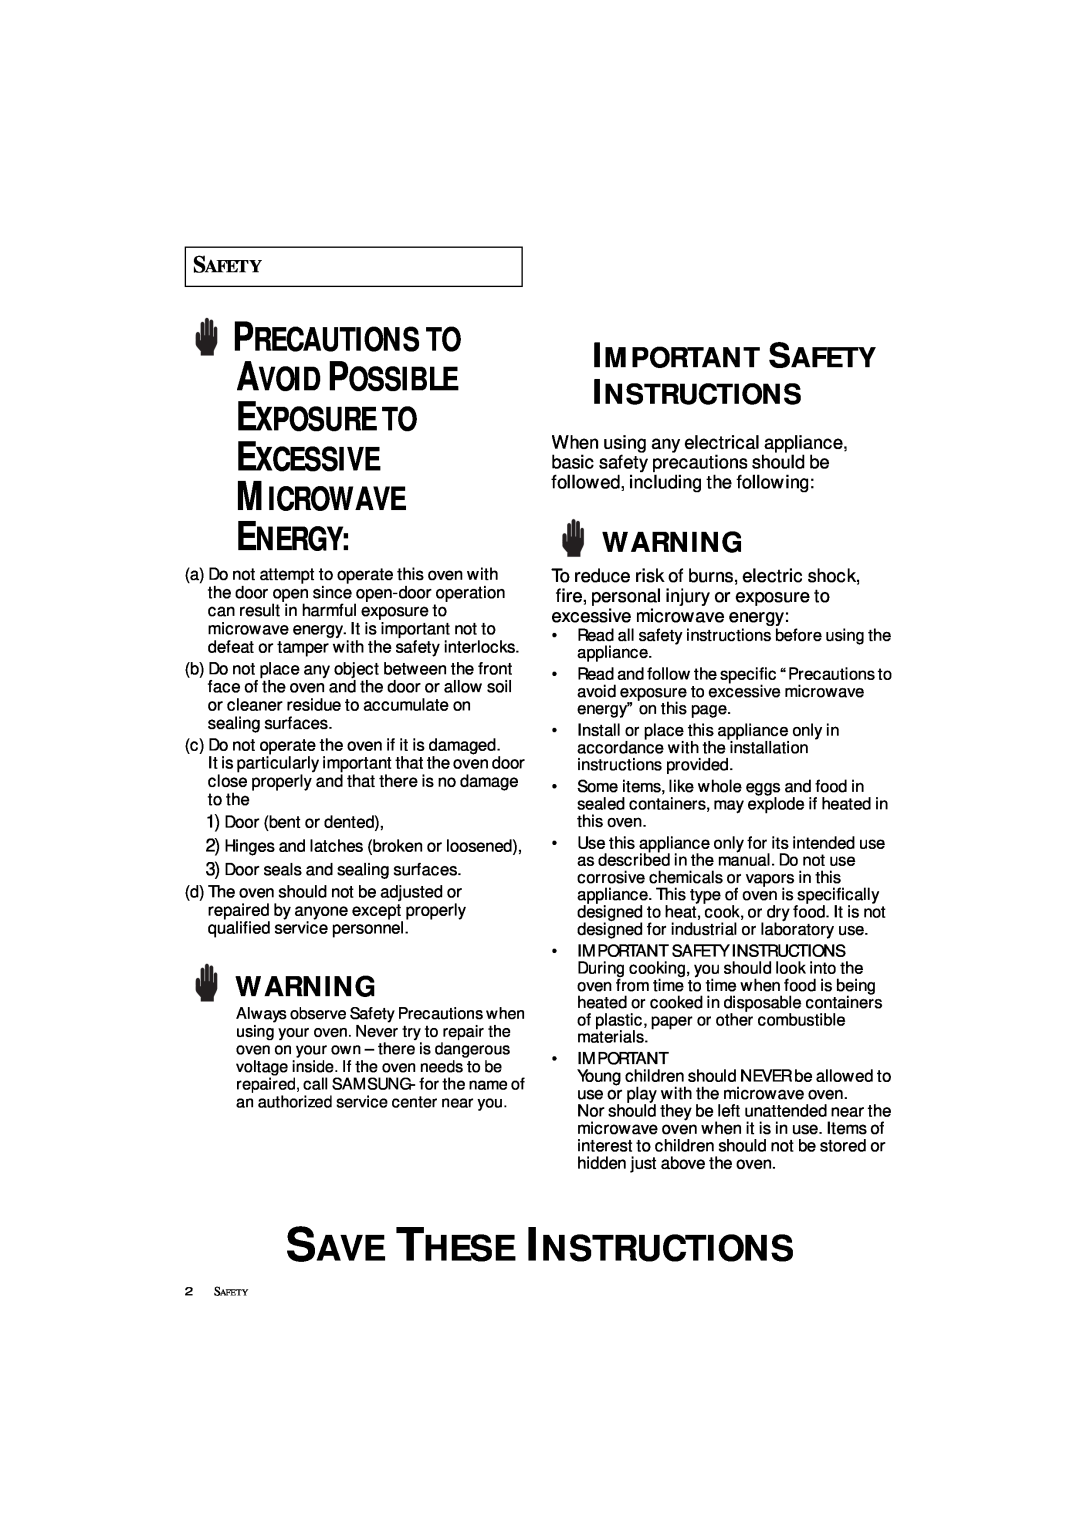 Samsung DE7711 Save These Instructions, Safety, Exposure To Excessive Microwave Energy, Precautions To Avoid Possible 